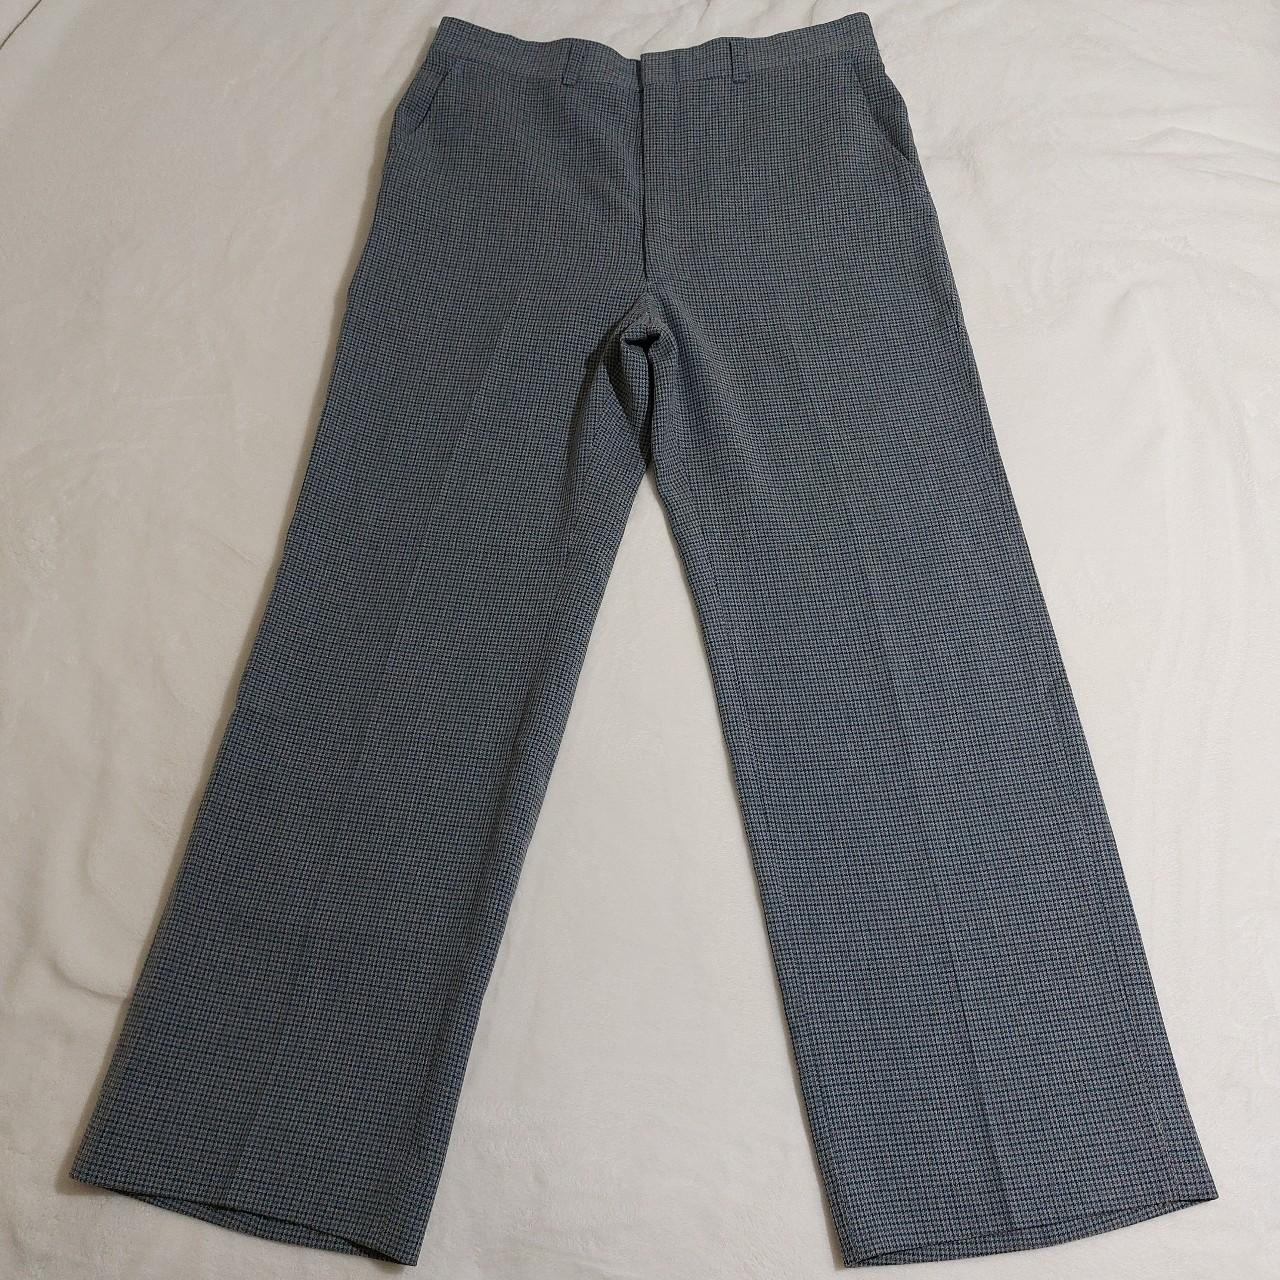 Haggar Men's Grey and Blue Trousers (3)